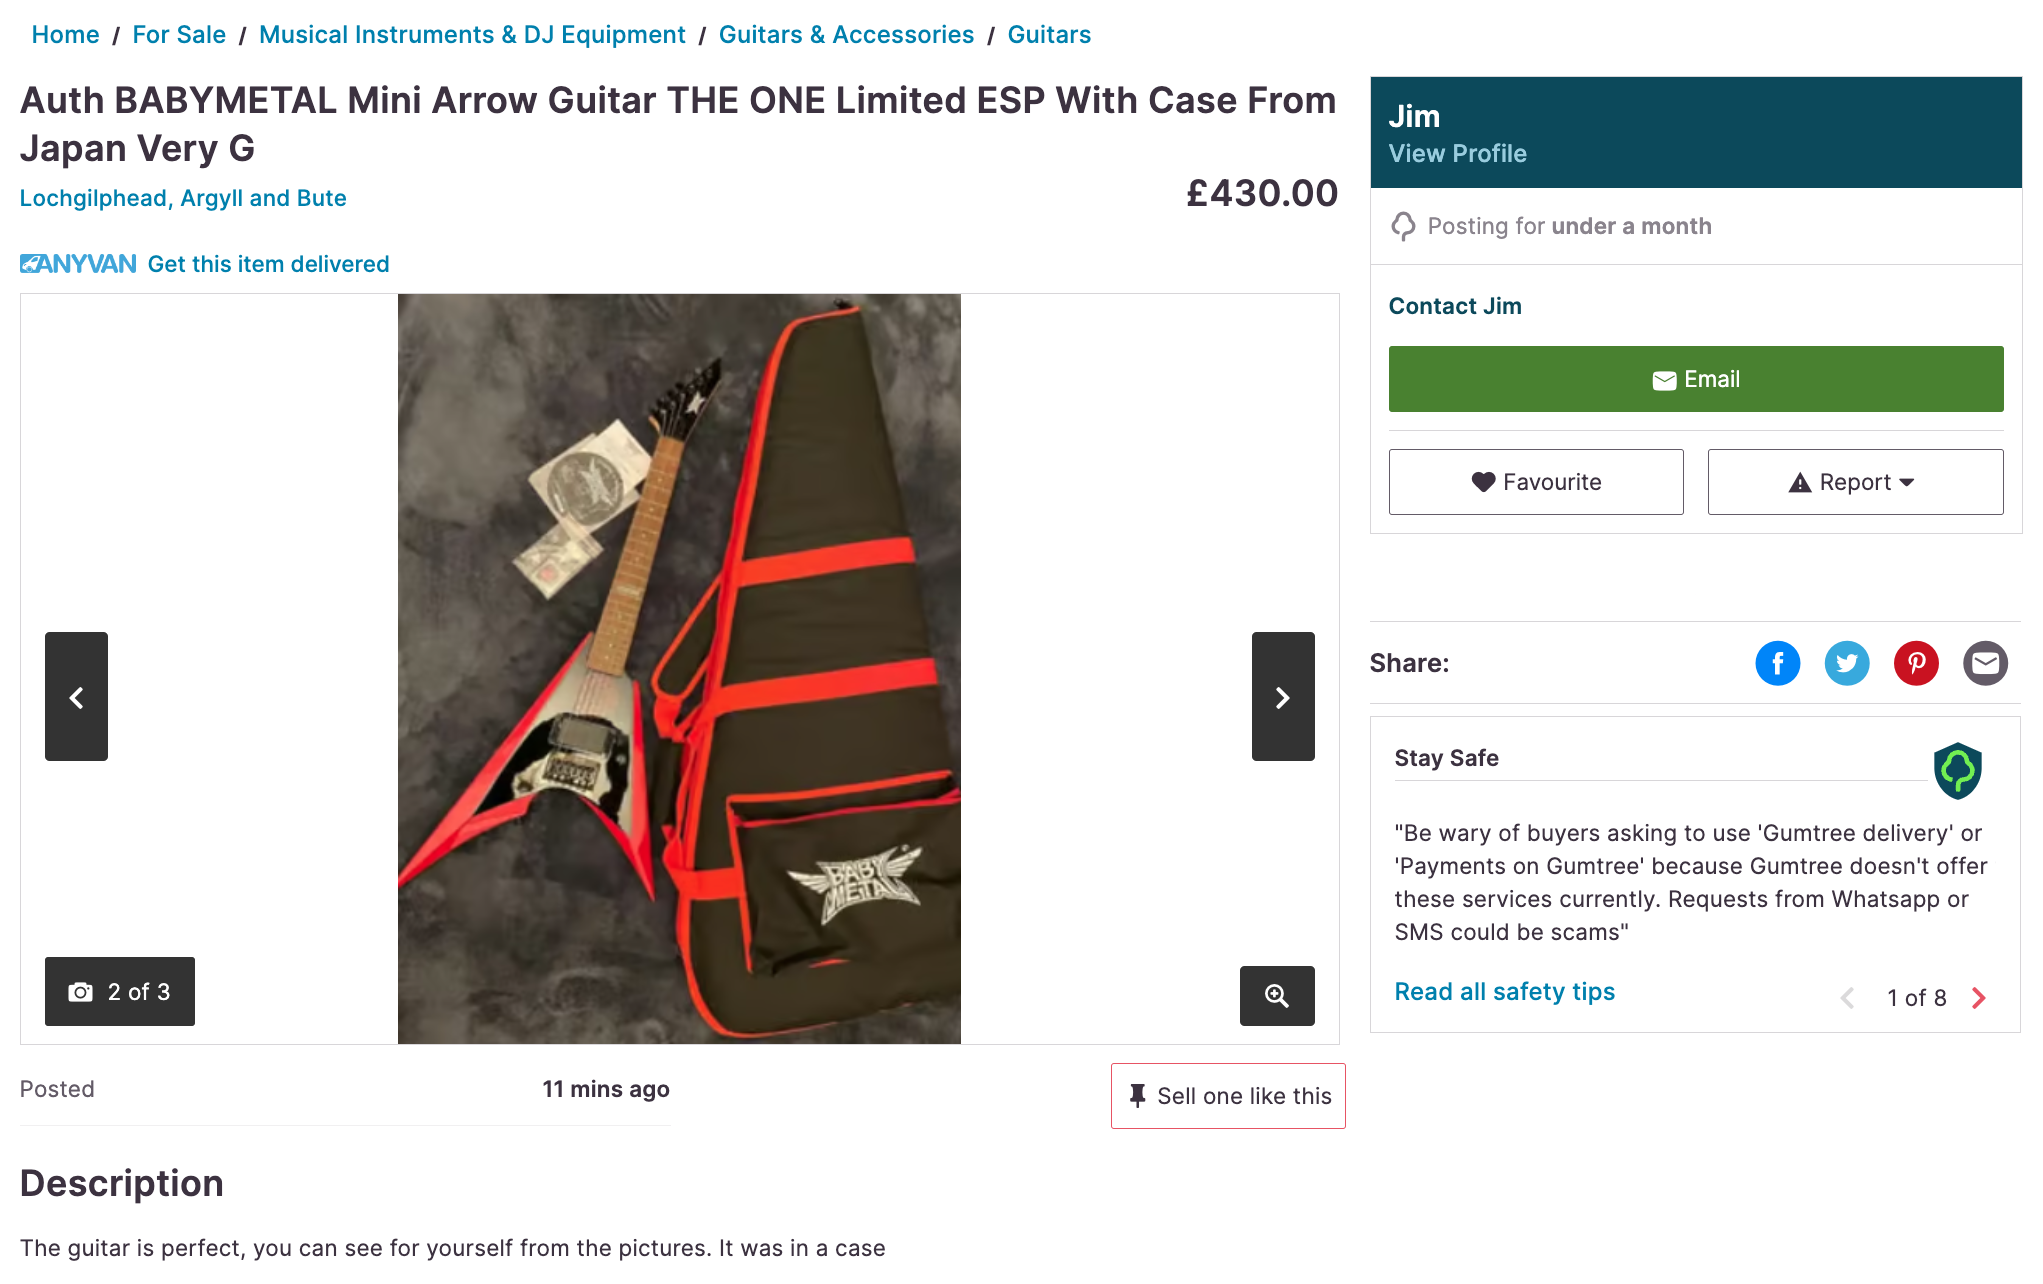 An example of a fake listing on Gumtree